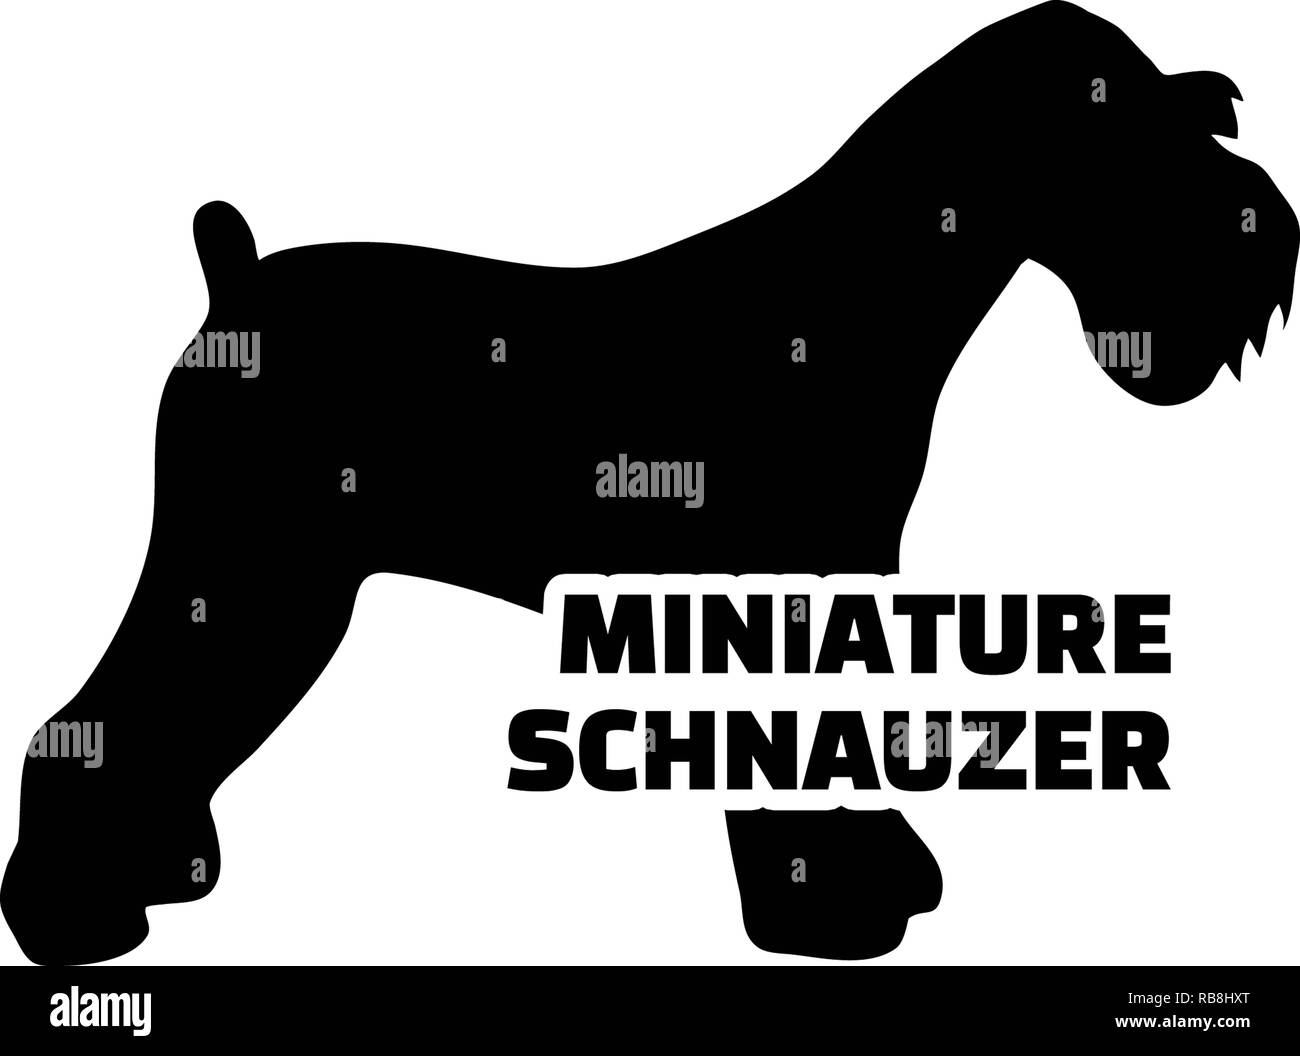 Miniature Schnauzer silhouette real with word Stock Photo